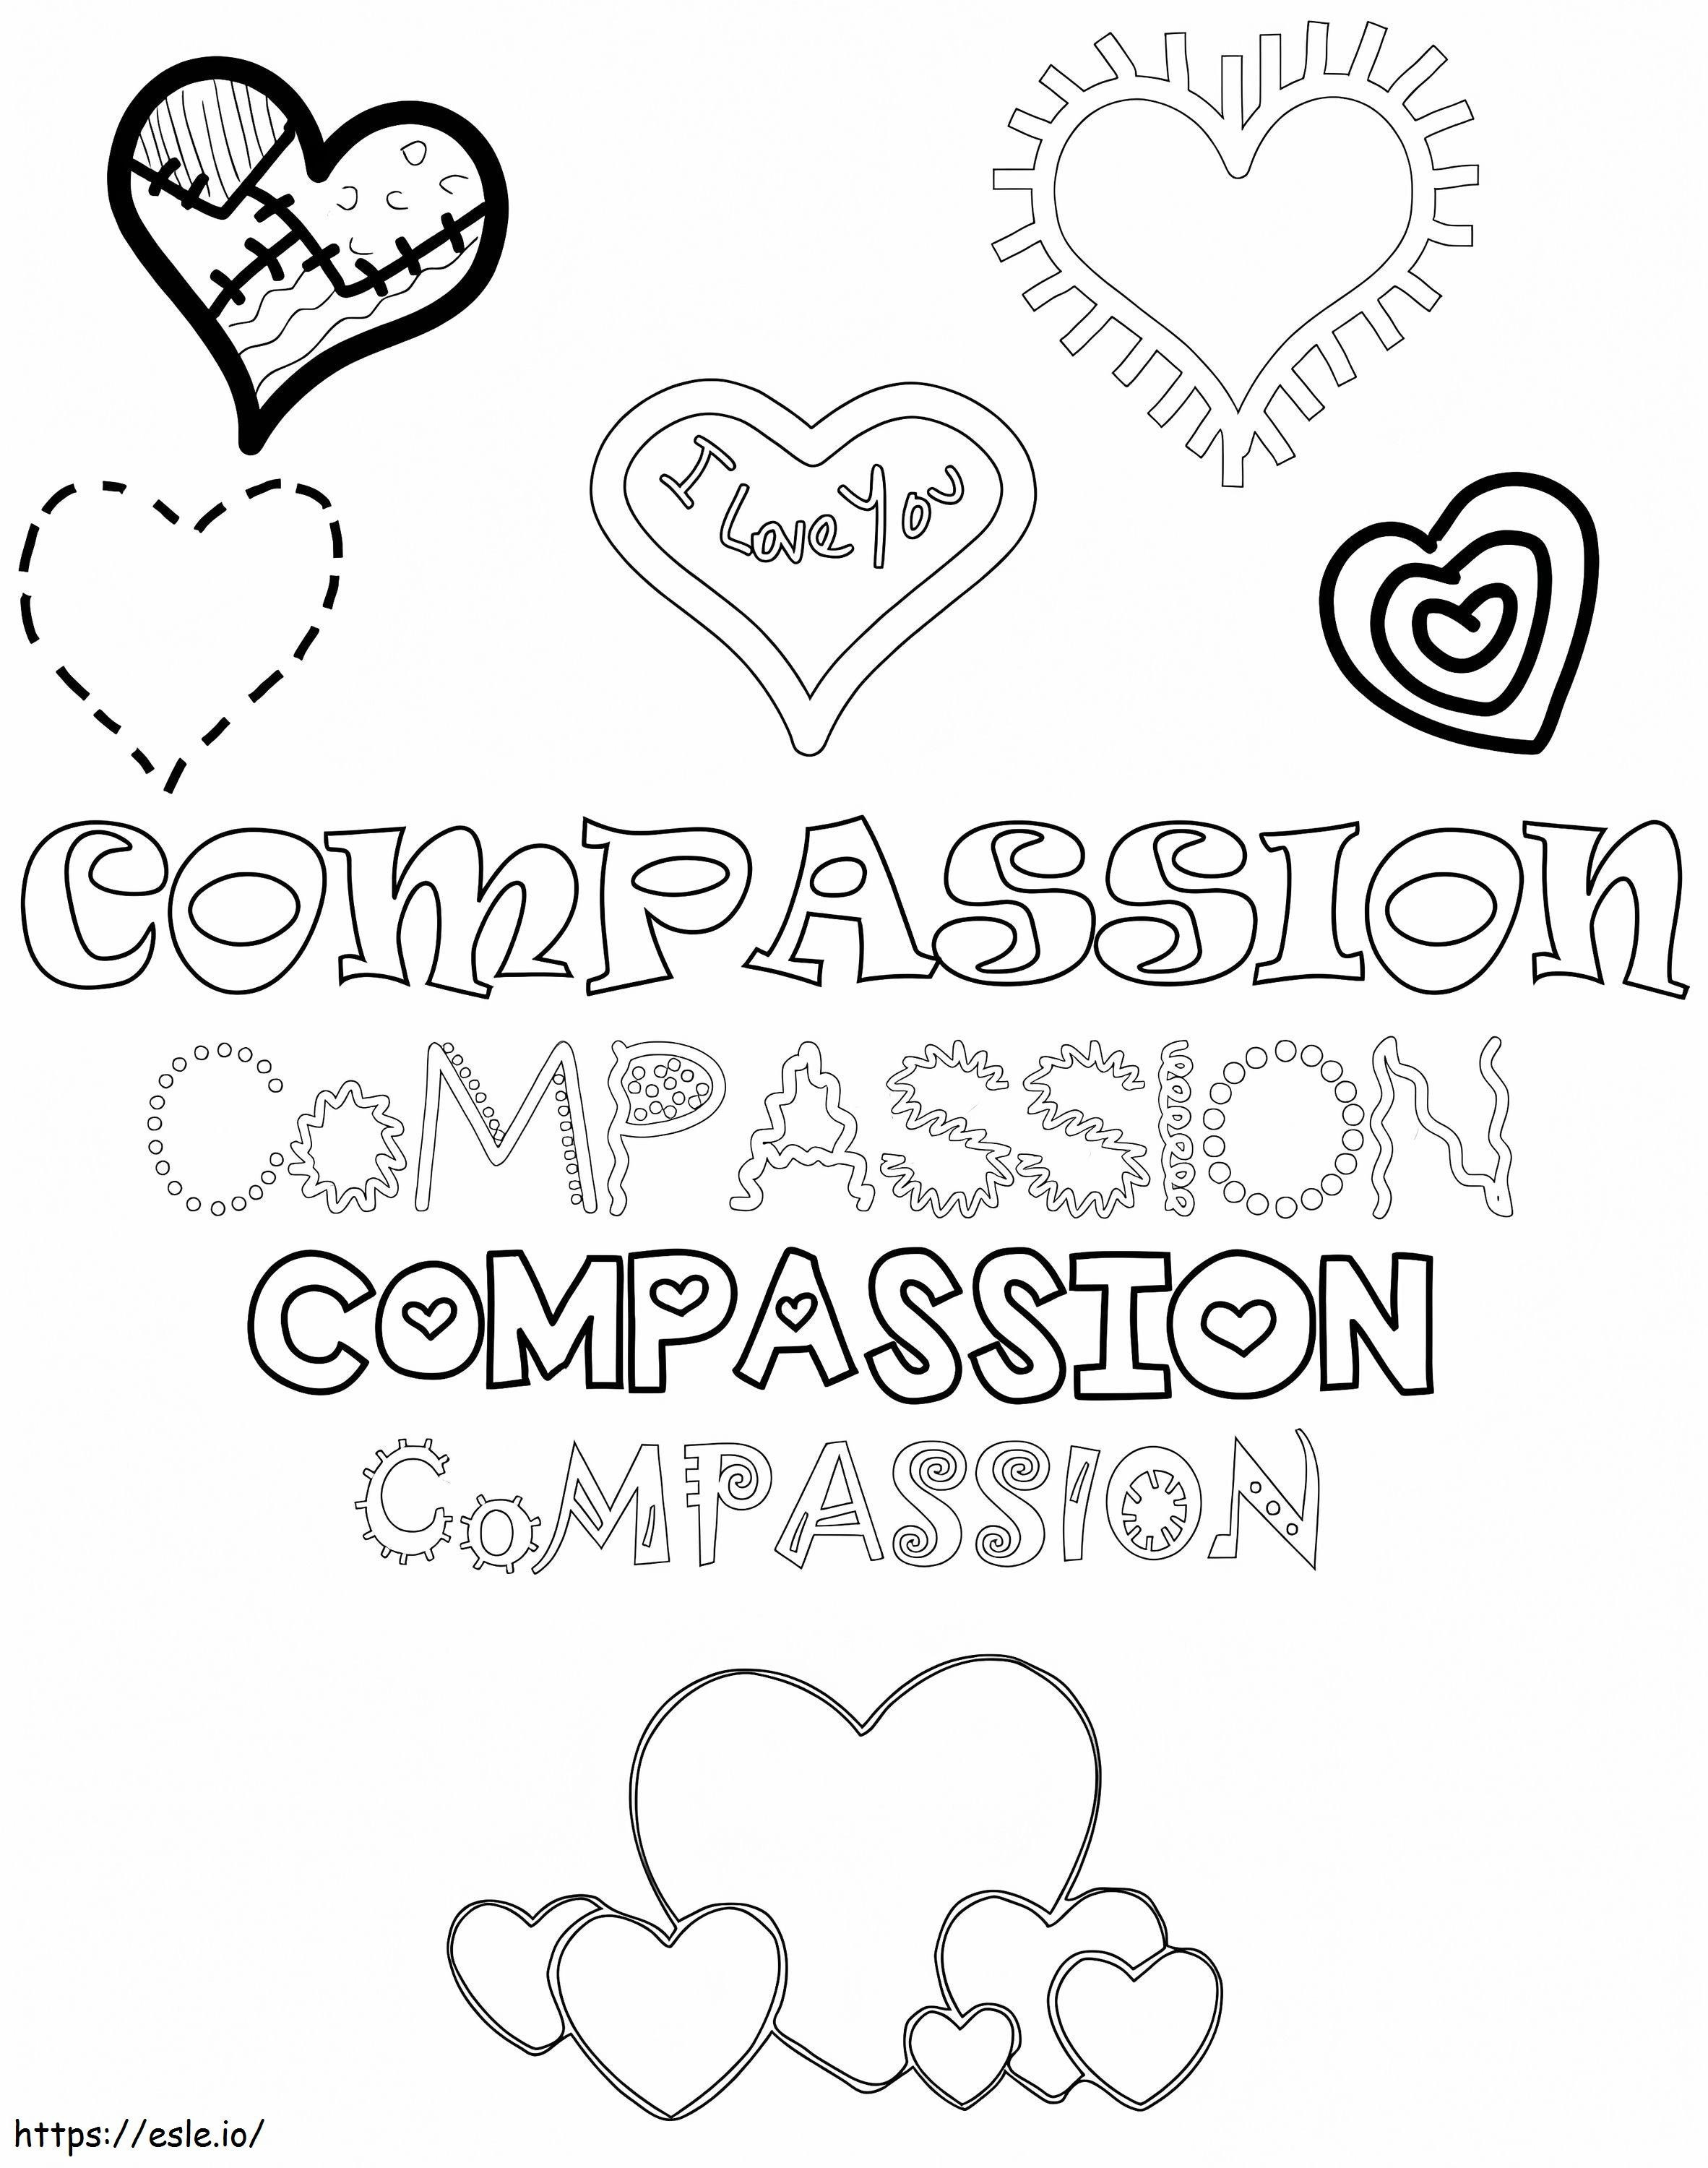 Compassion Art coloring page